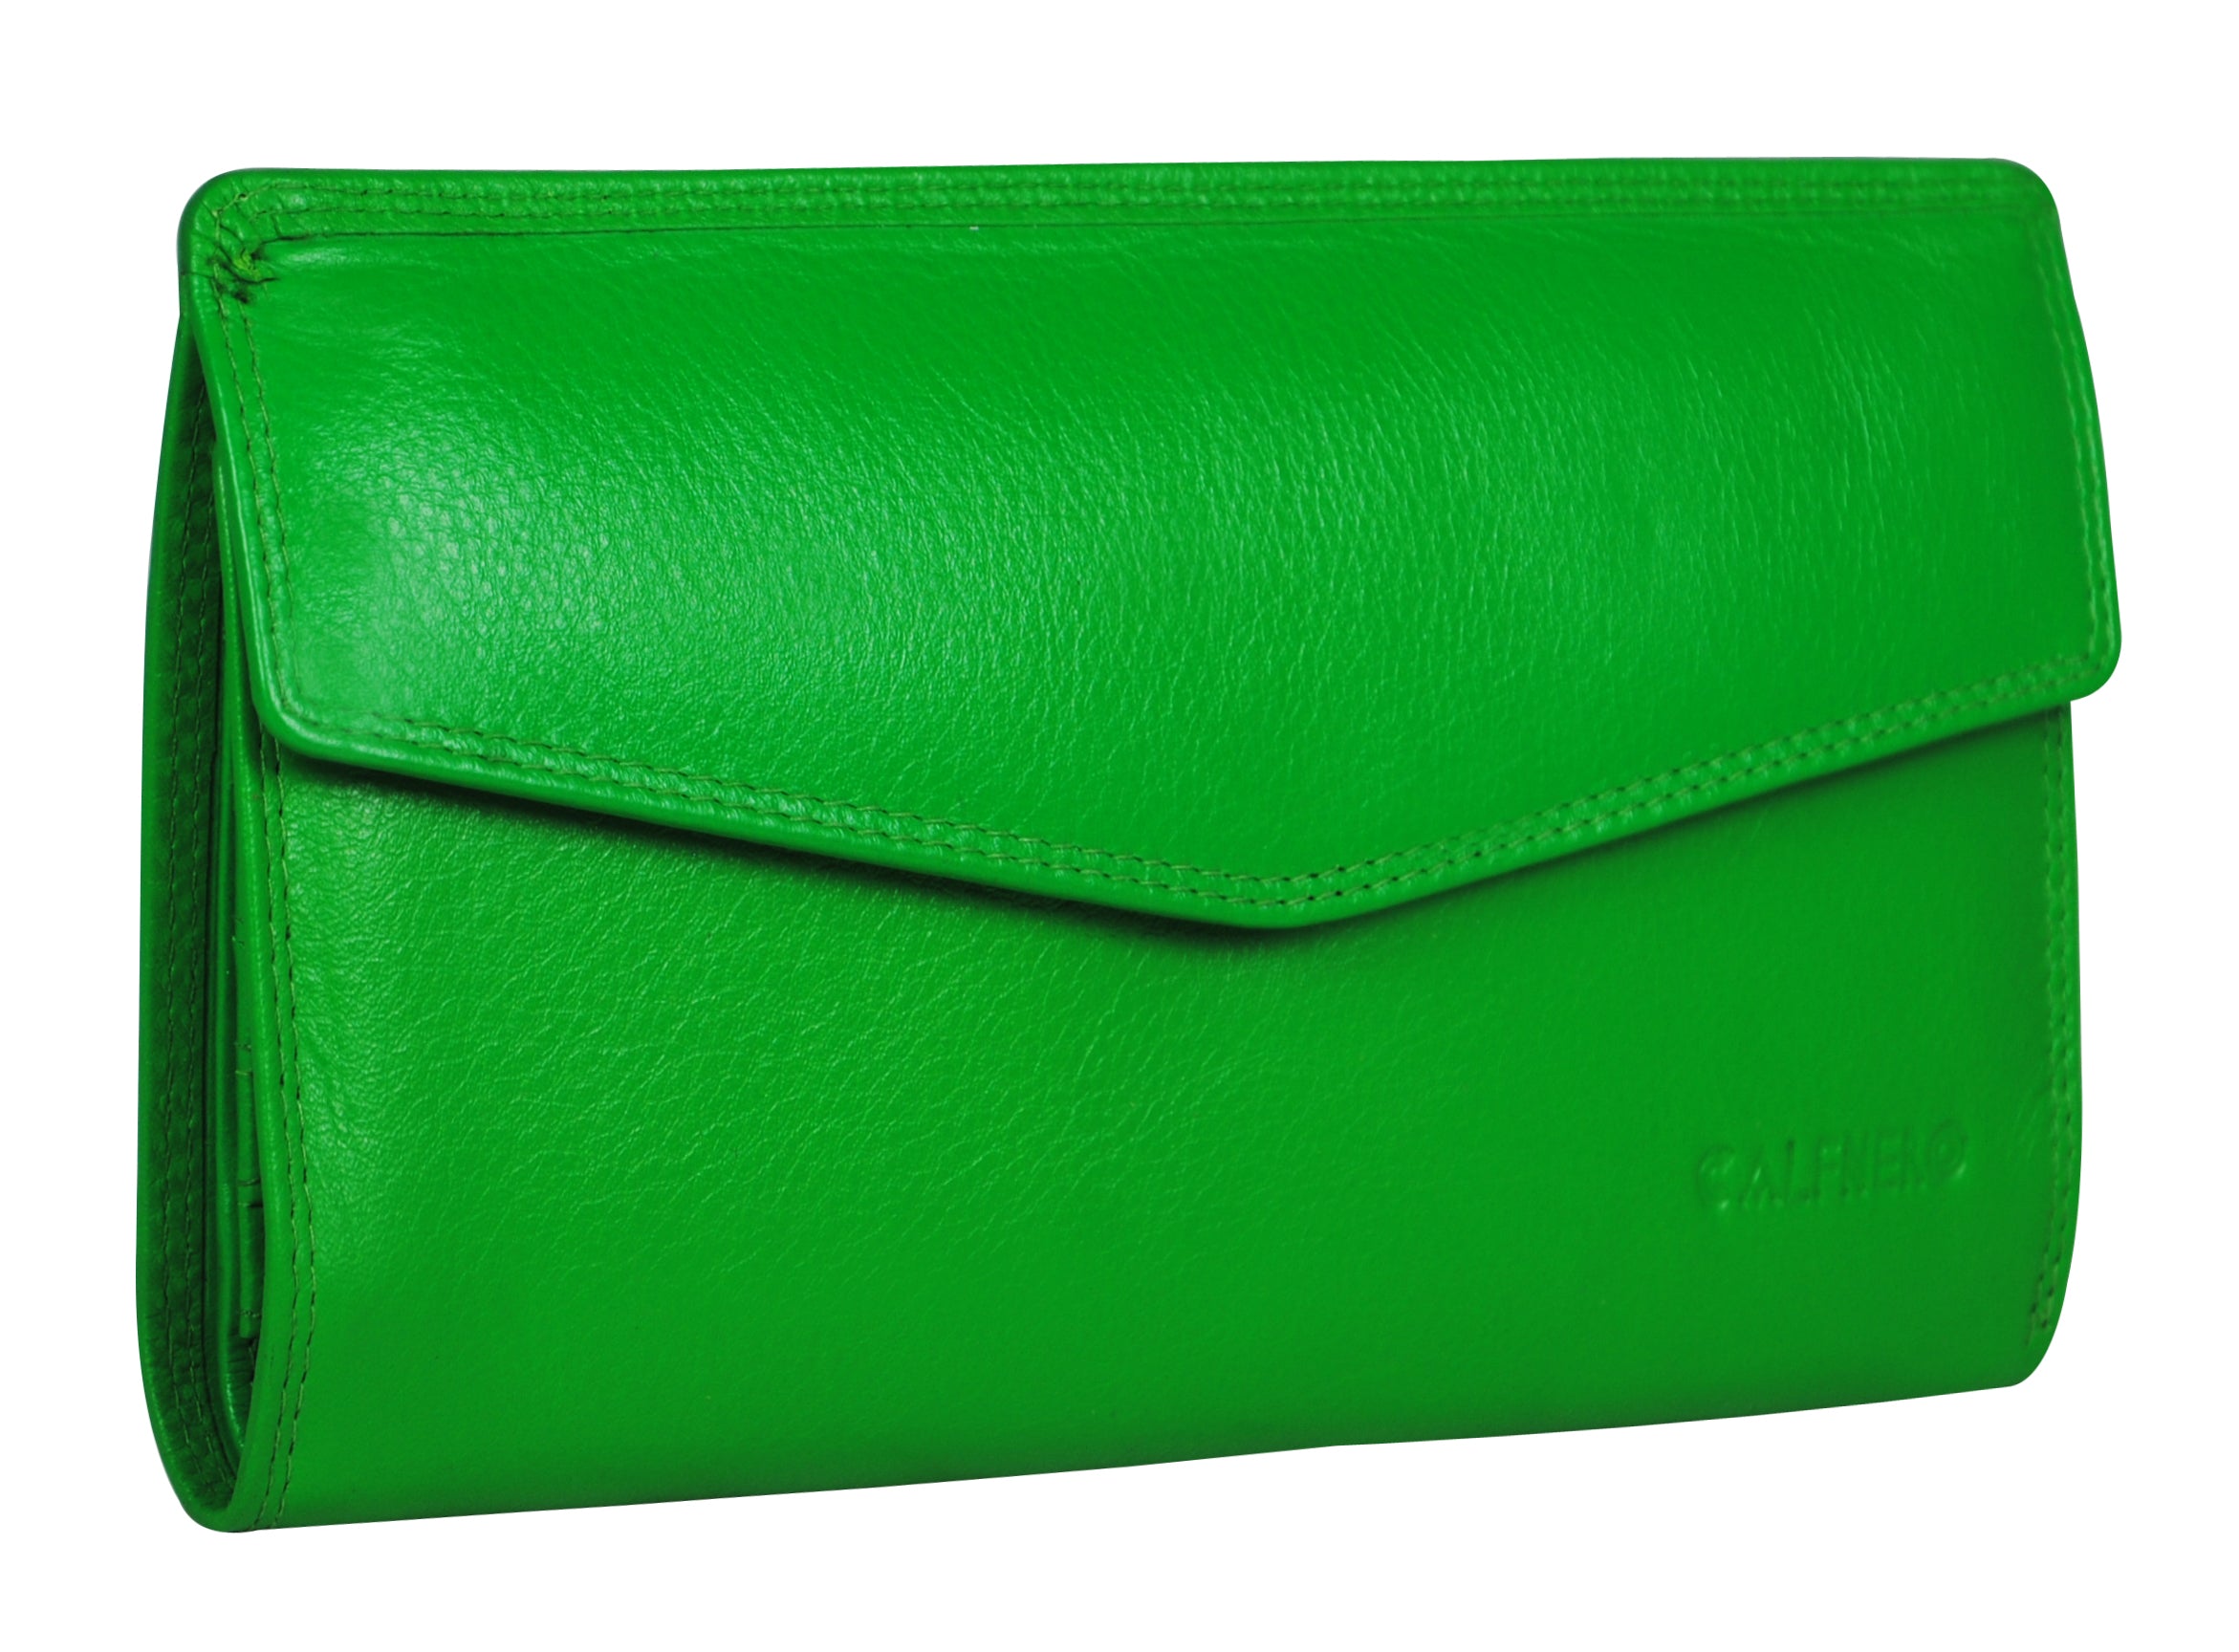 Replica Hermes Dogon Duo Wallet In Green Clemence Leather